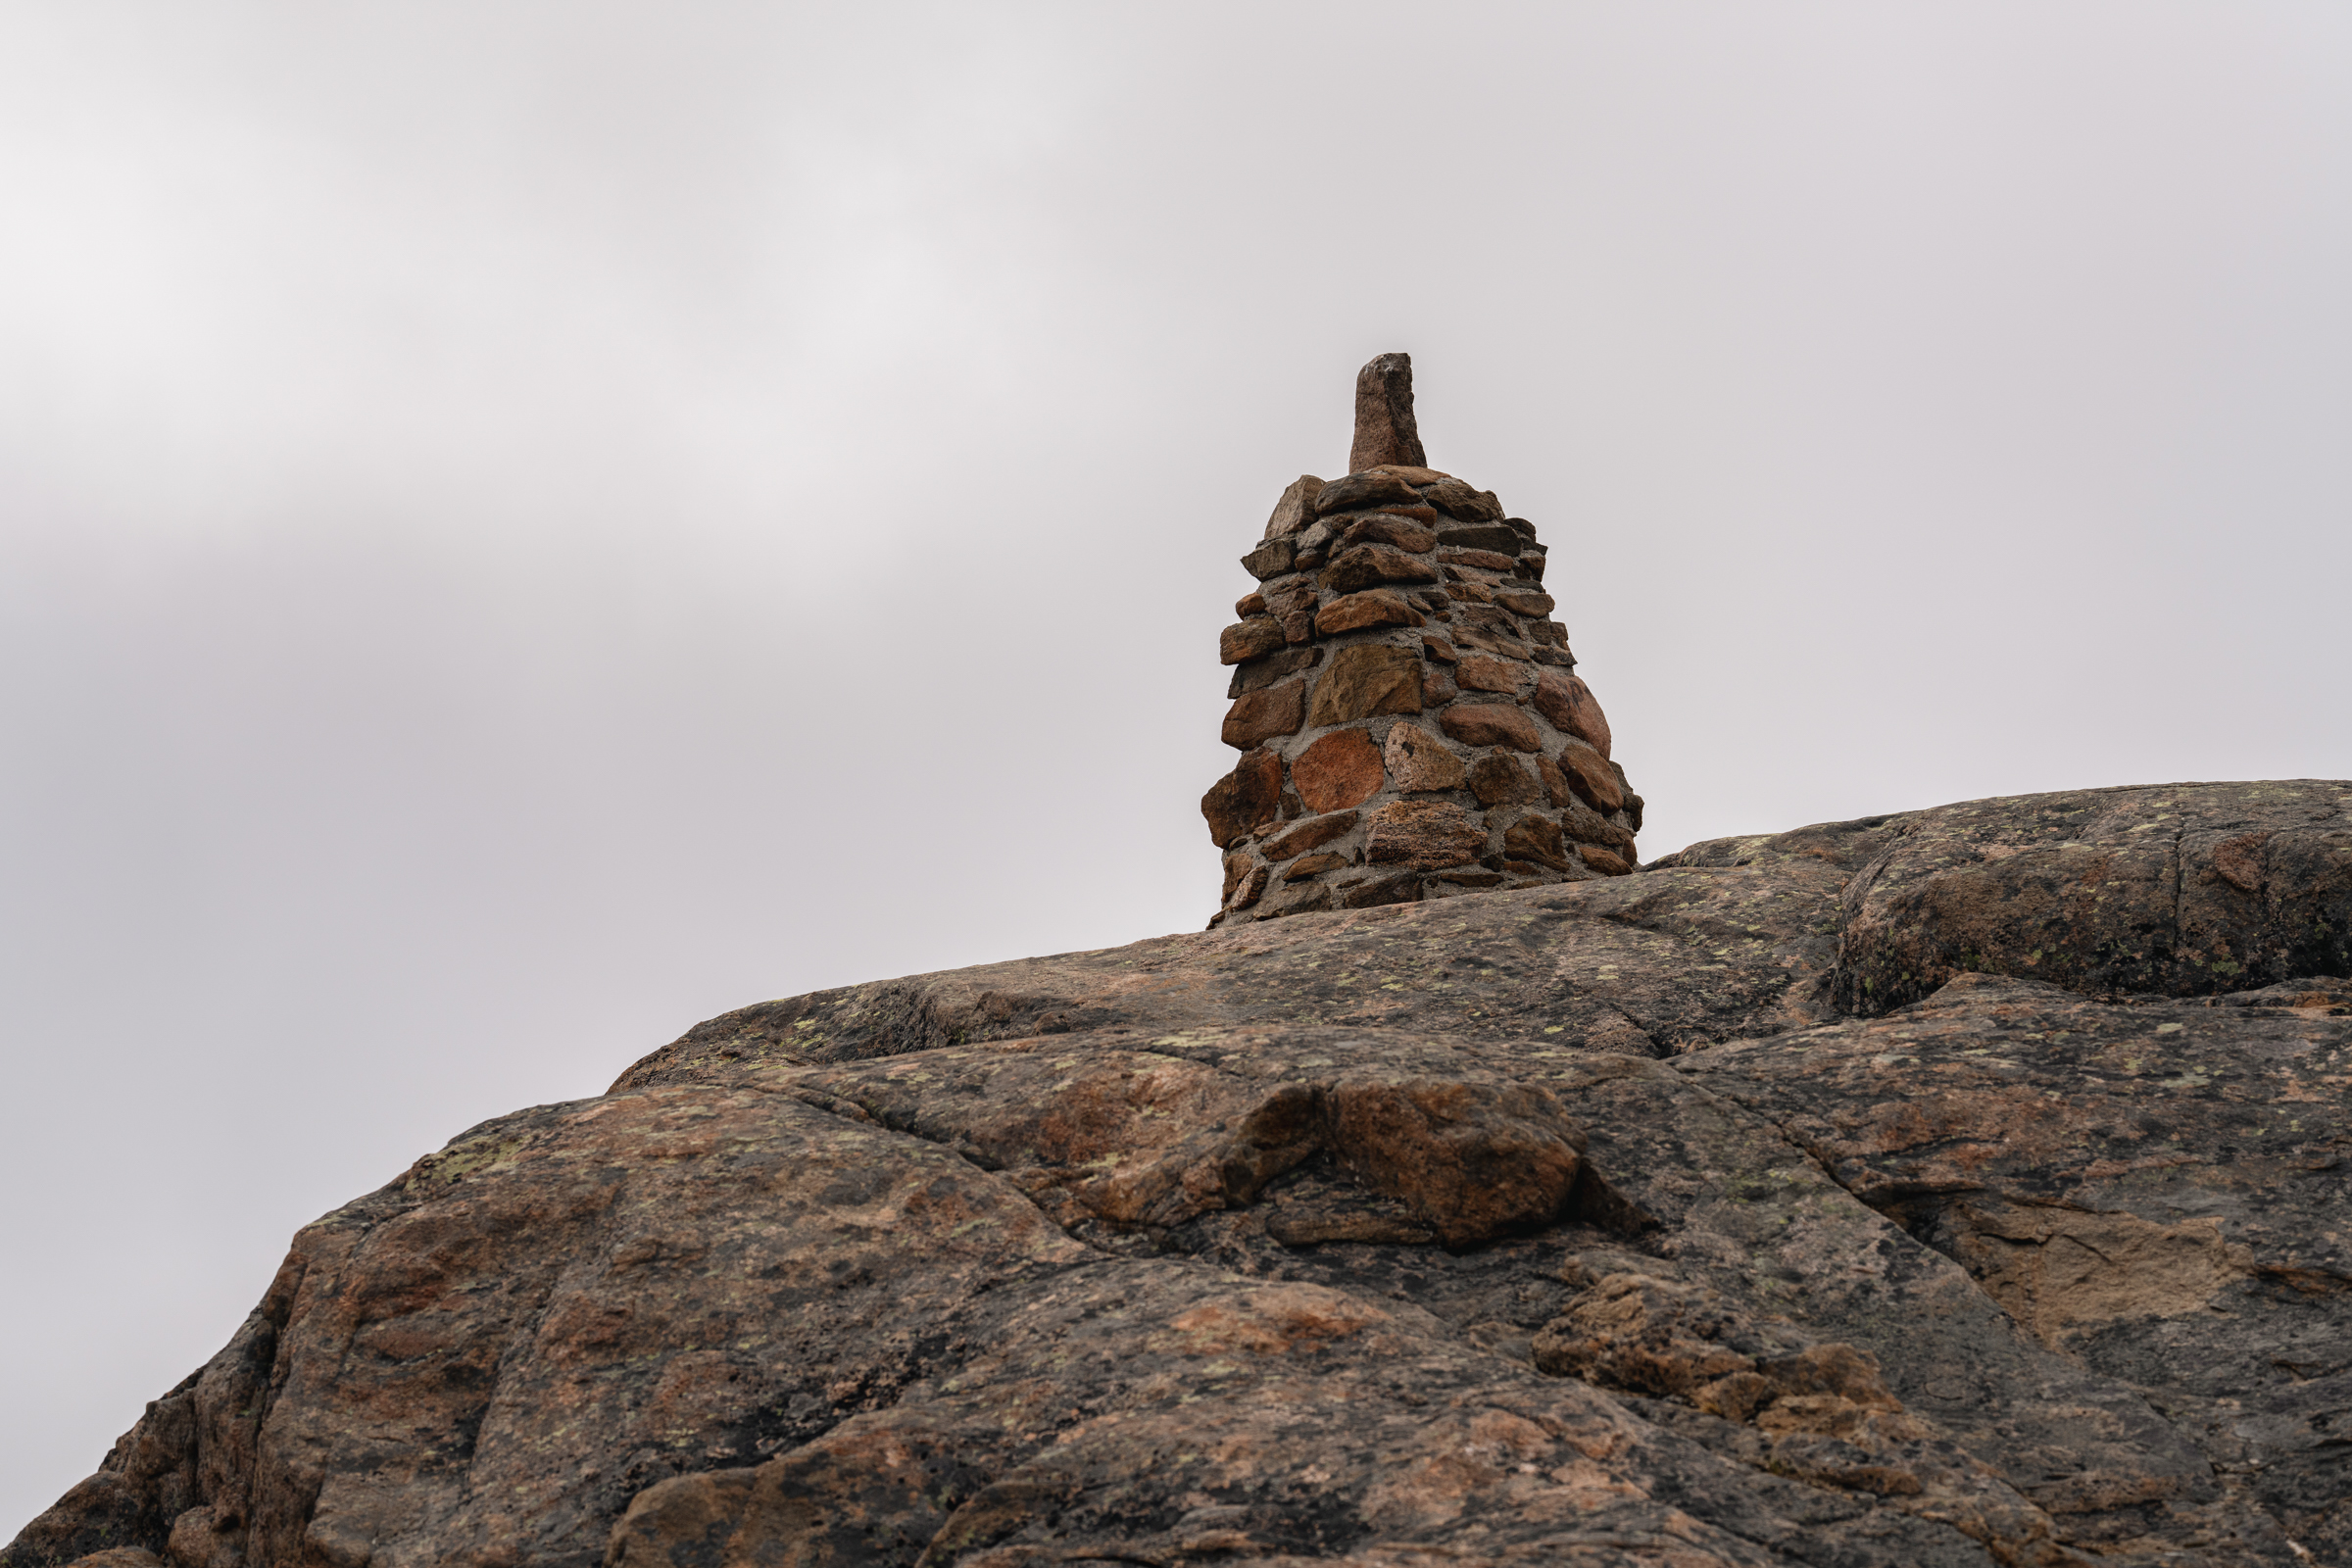 Cairn on top of the mountain